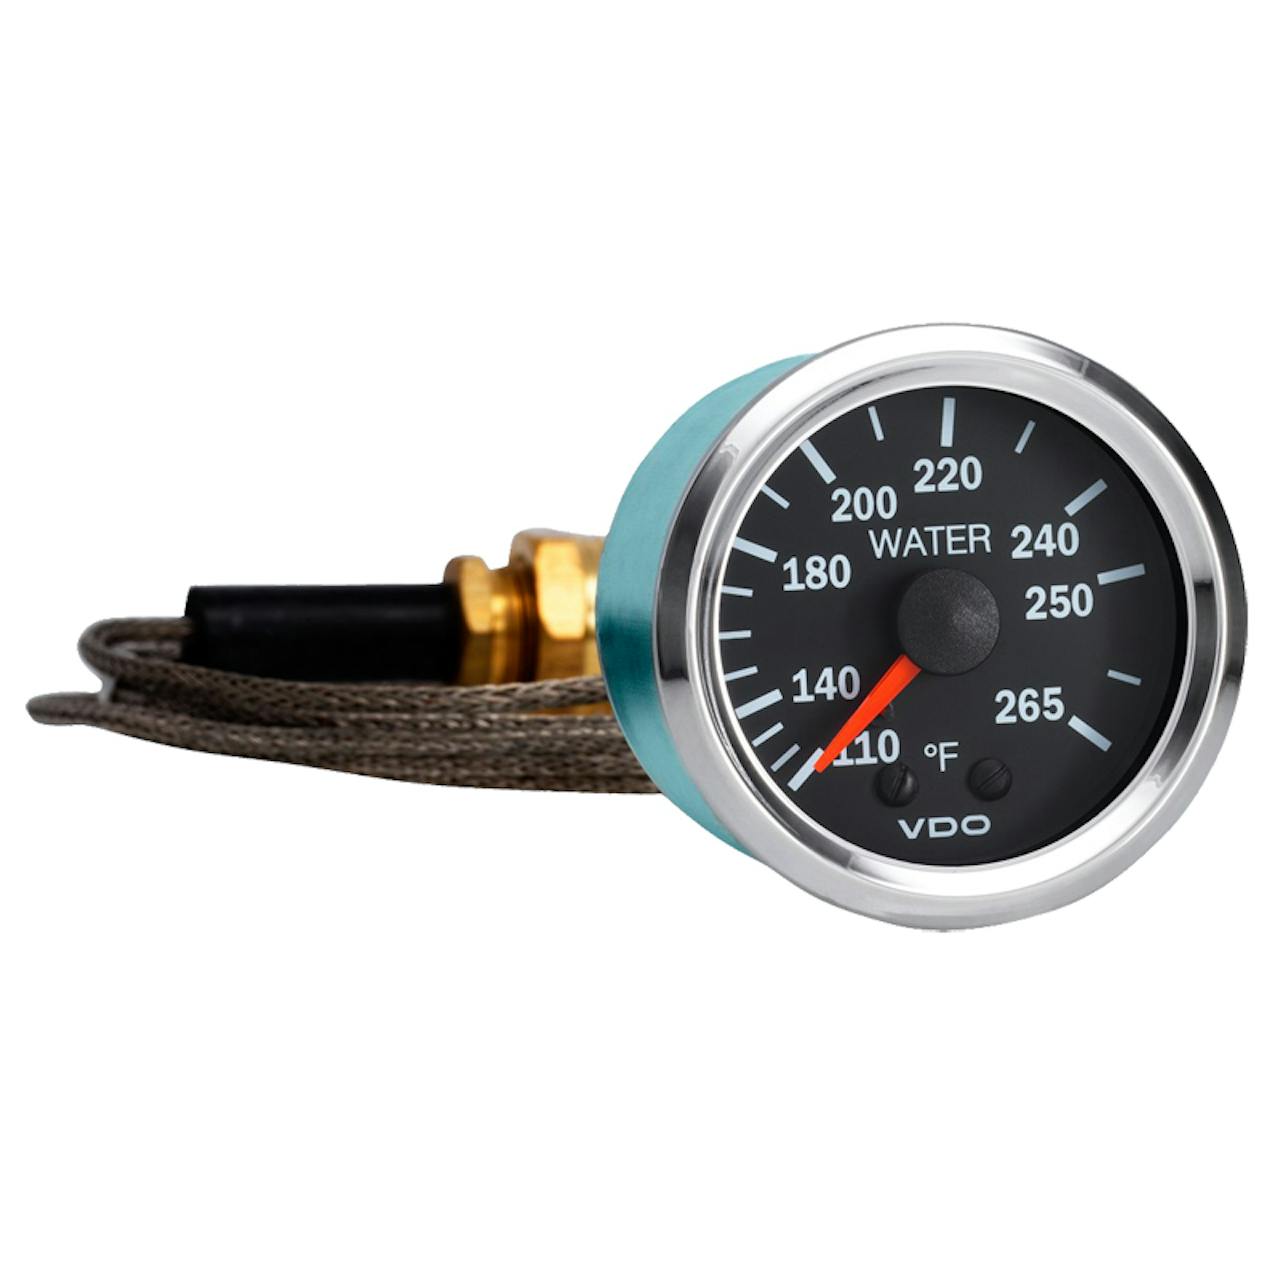 https://raneys-cdn11.imgix.net/images/stencil/original/products/192720/90081/Semi_Truck_Mechanical_Water_Temperature_Gauge_With_Capillary_Vision_Chrome_180_101__79631.1430254819.jpg?auto=compress,format&w=1280